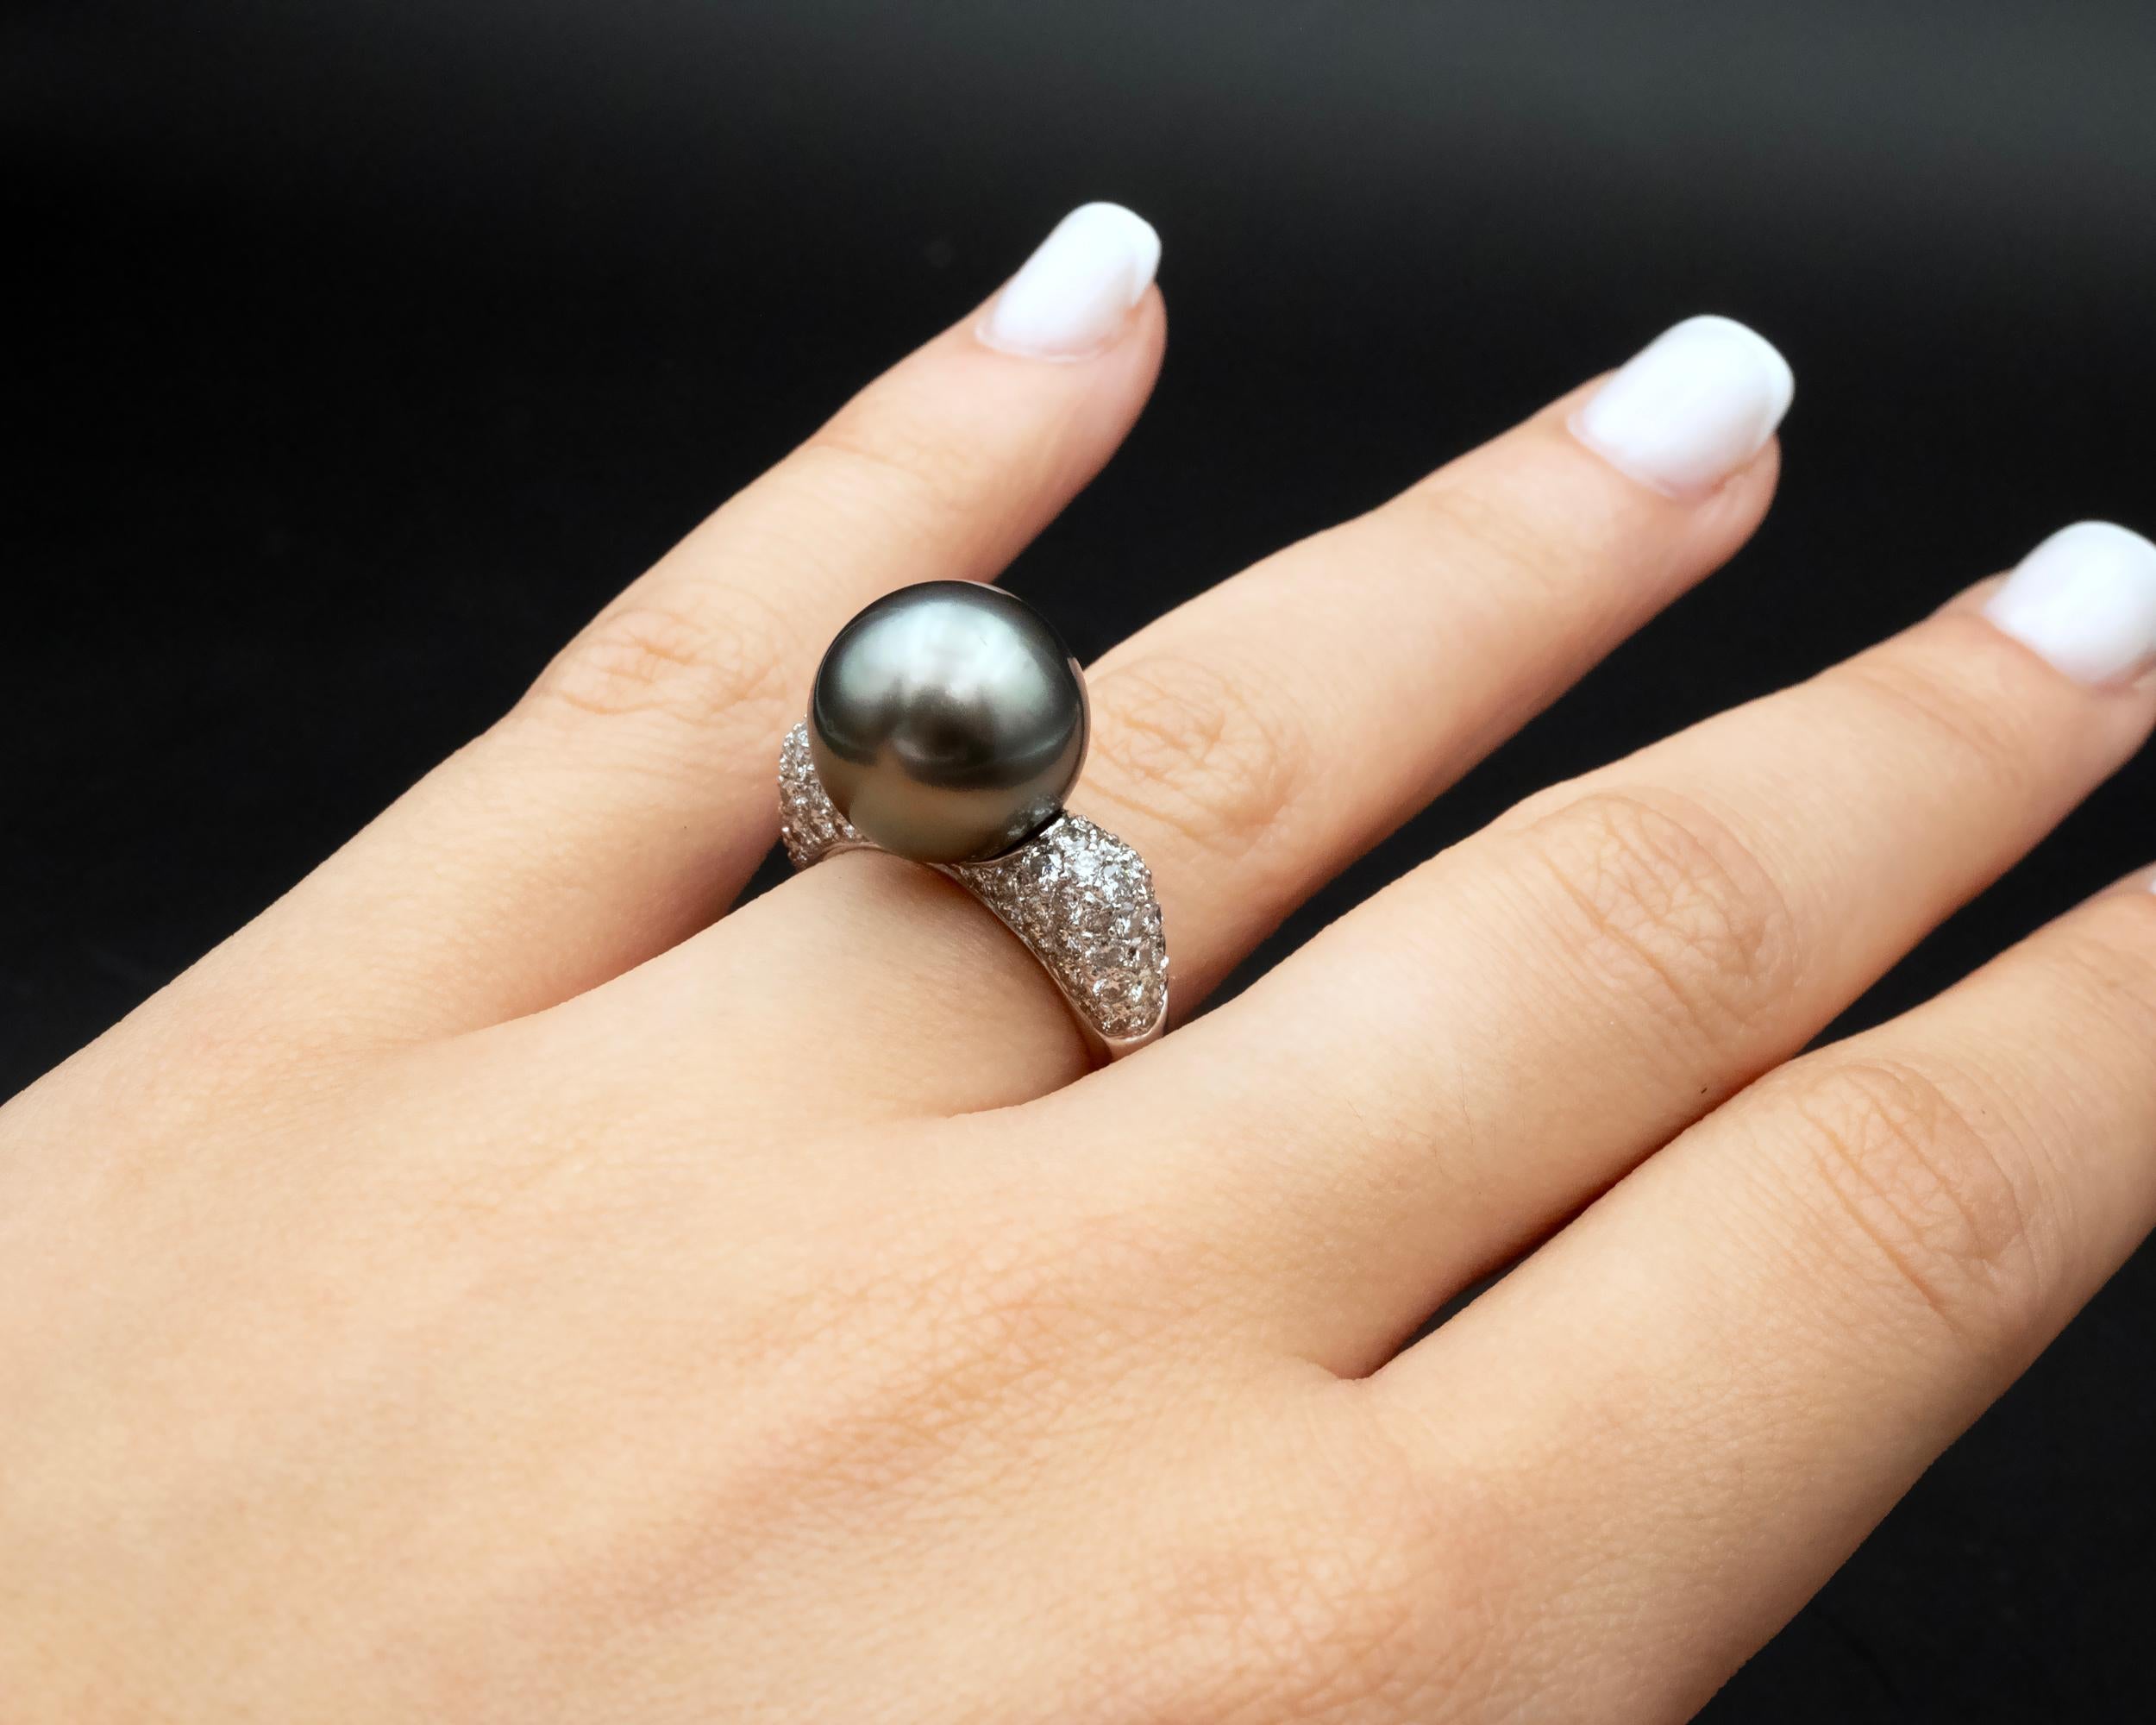 Elegance meets modern sophistication in this 18 karat gold ring, featuring a stunning 13 millimetre south sea Tahitian pearl weighing 16.54 carats with captivating dark grey hues and subtle pink and green overtones. 
The shank is pavé set with 1.61